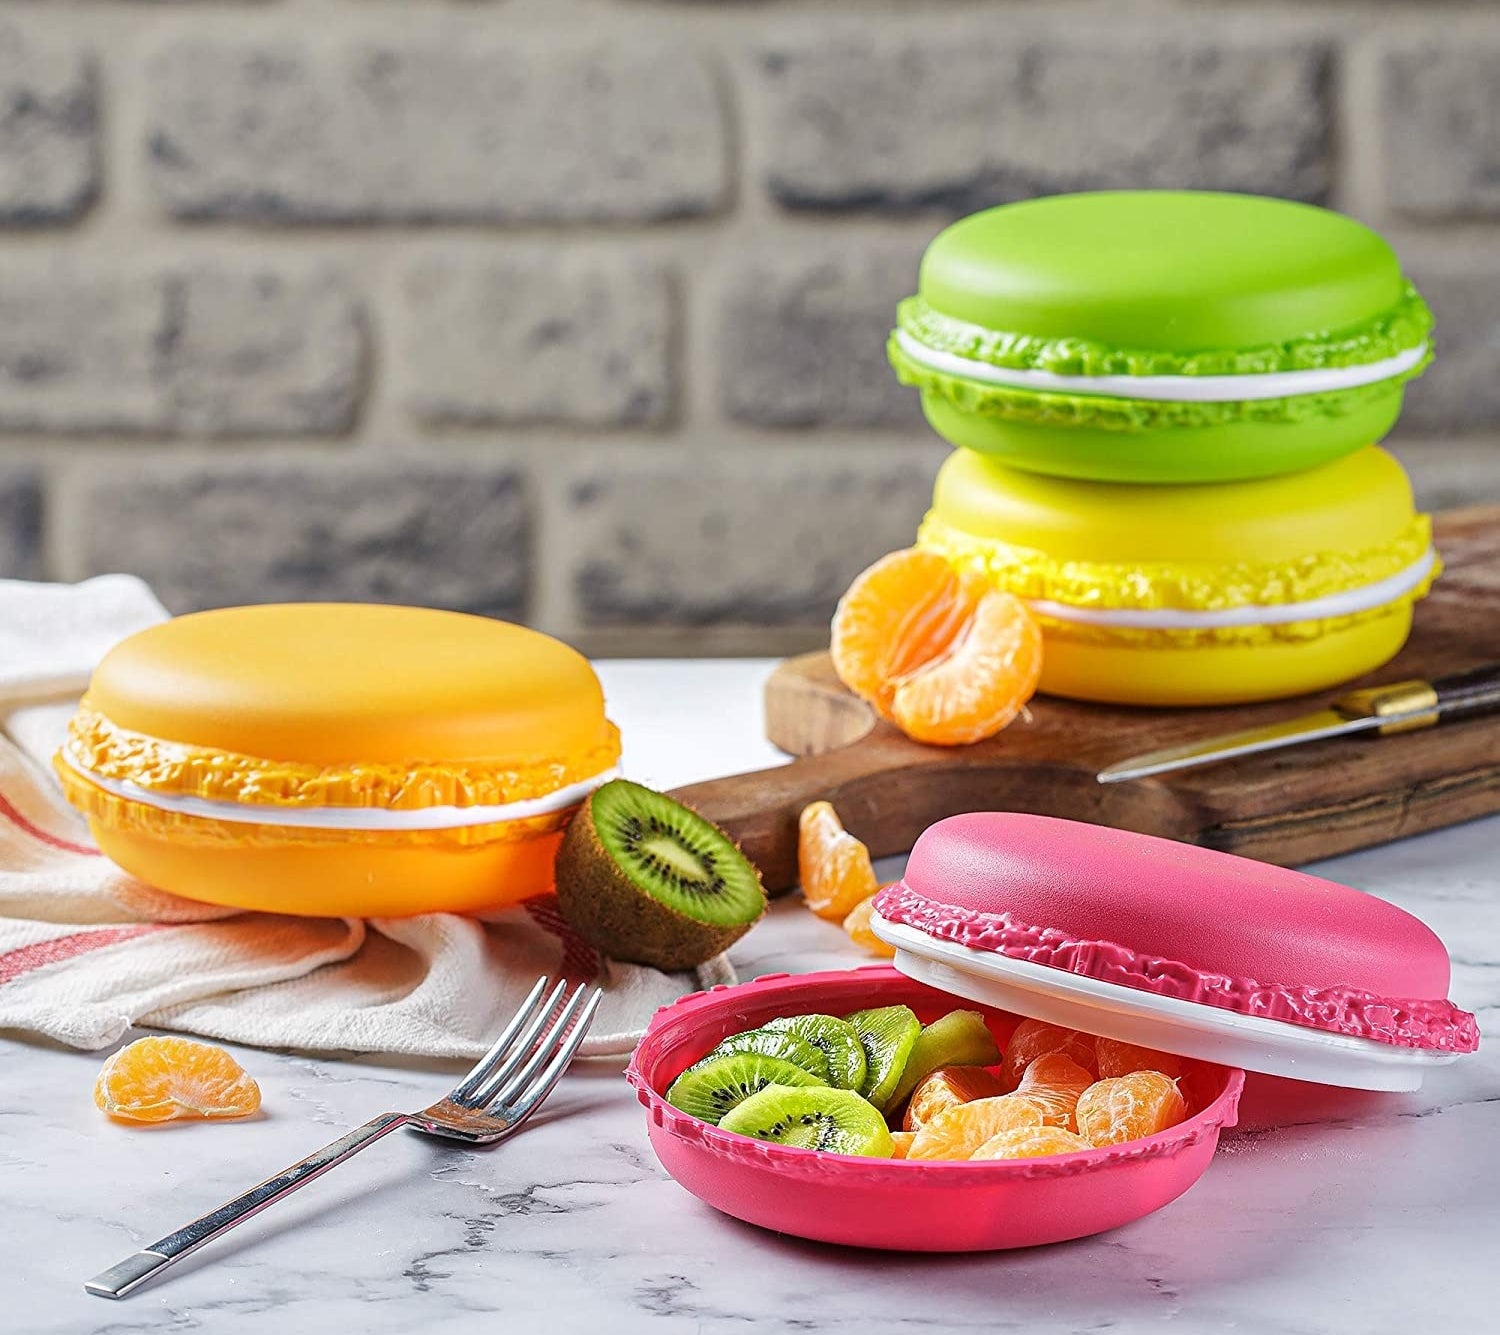 four macaron-shaped containers in orange, yellow, green, and pink